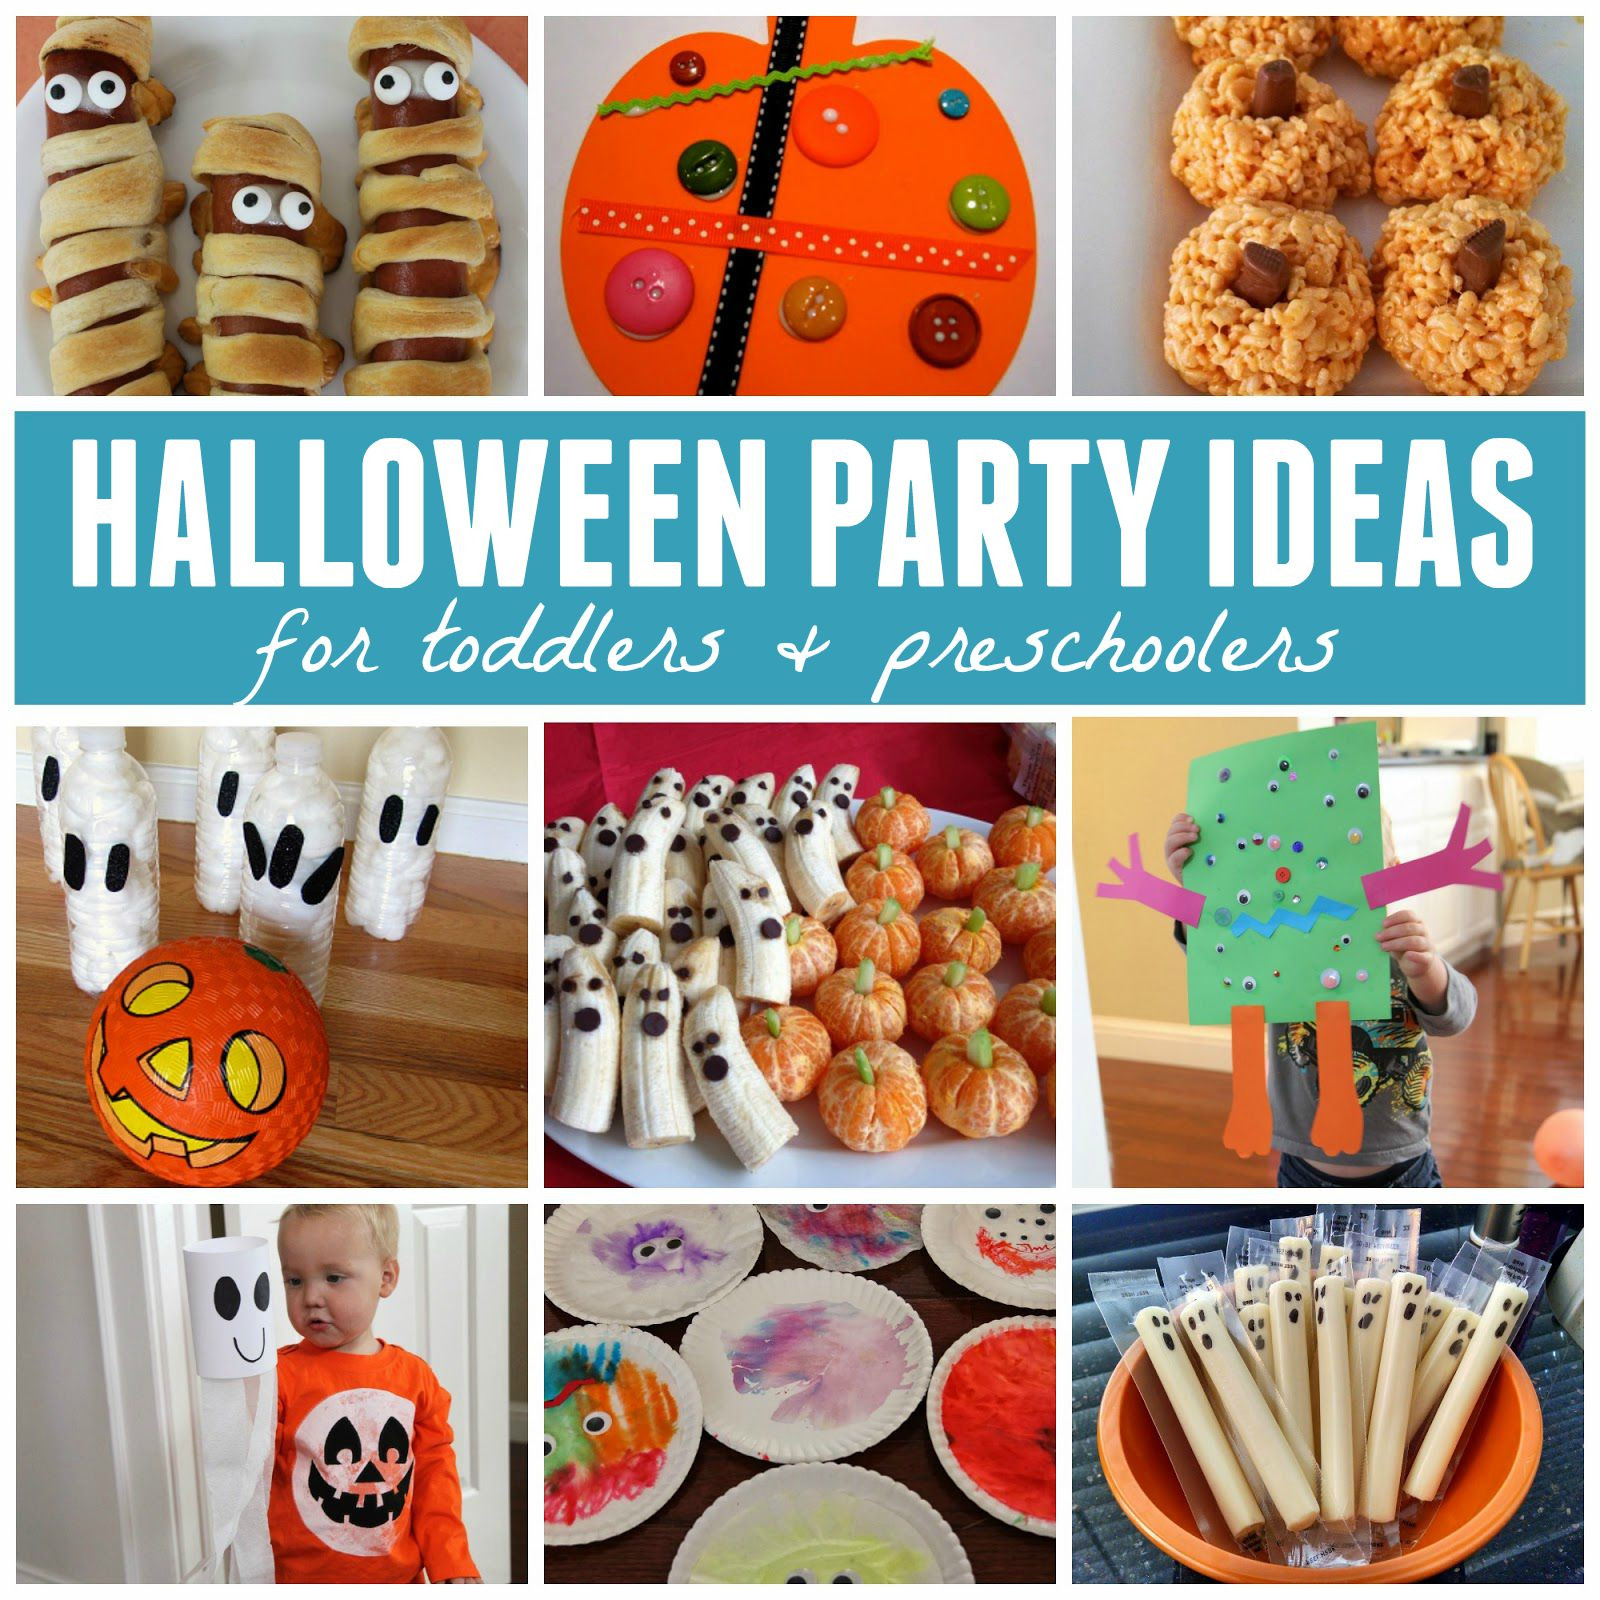 Kid Halloween Party Ideas Toddlers
 Toddler Approved Last Minute Halloween Party Ideas